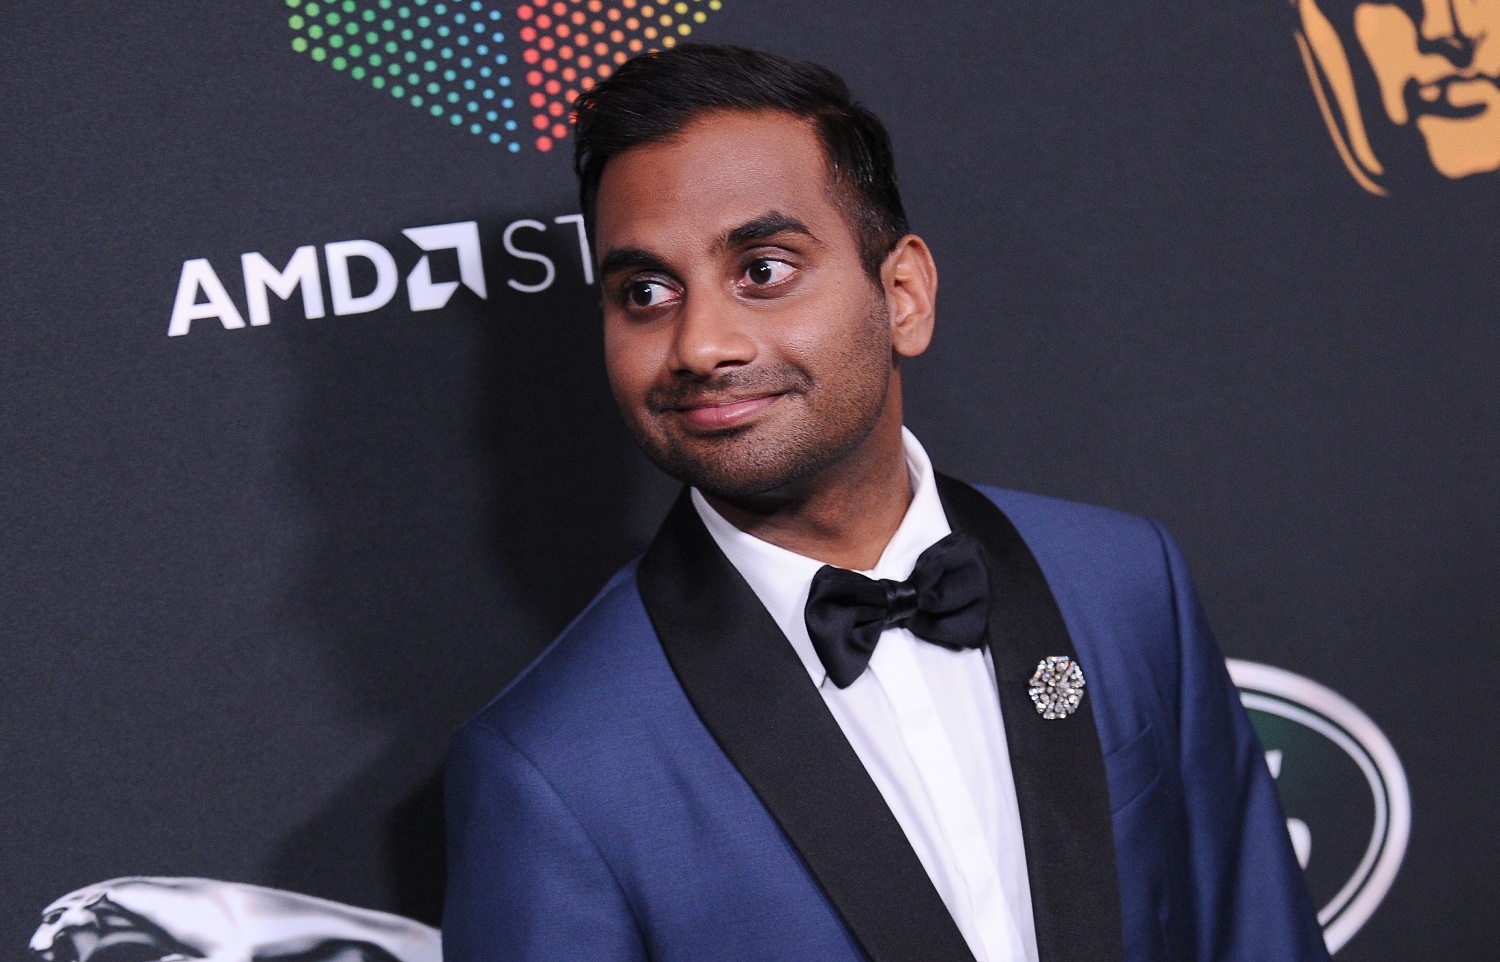 OCTOBER 27: Actor Aziz Ansari attends the 2017 AMD British Academy Britannia Awards at The Beverly Hilton Hotel on October 27, 2017 in Beverly Hills, California. (Photo by Jason LaVeris/FilmMagic)